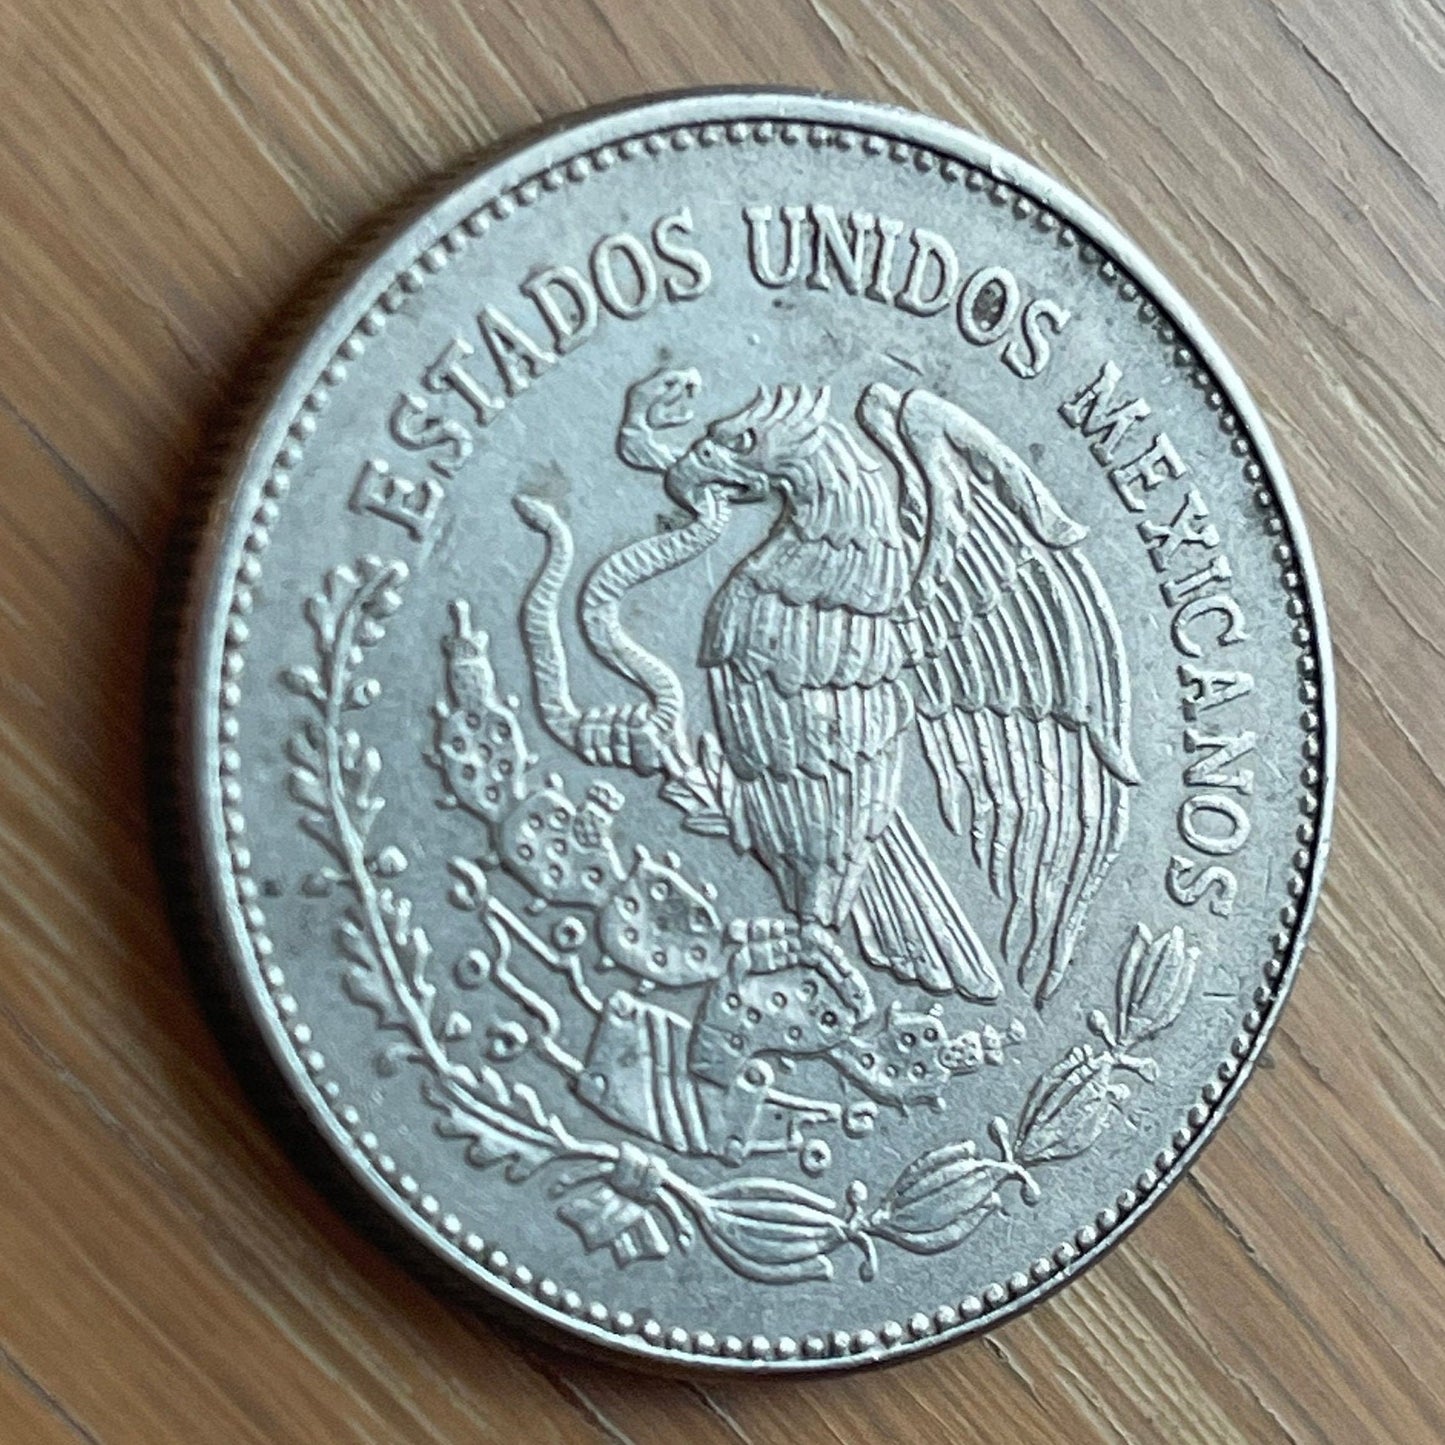 Moon Goddess & Eagle w/Snake 50 Pesos Mexico Authentic Large Coin Money for Jewelry and Craft Making